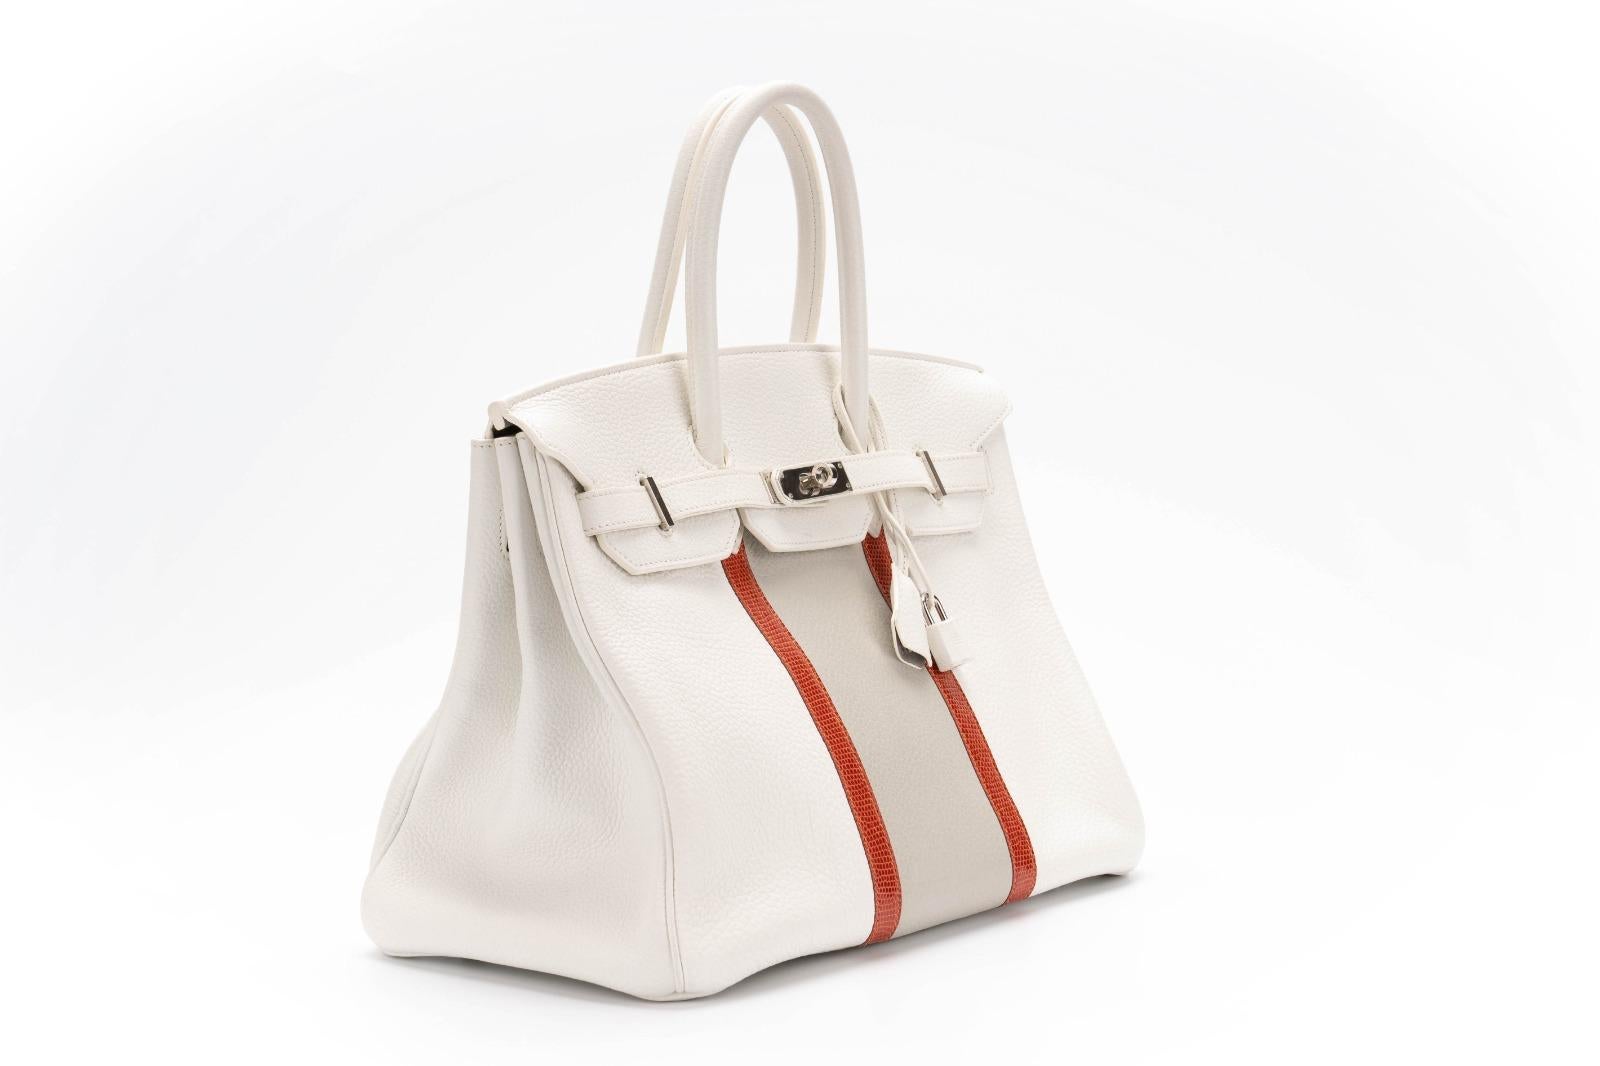 Limited Edition Hermes Birkin 35 Club in White clemence leather with Sanguine Lizard and Gris Perle
 Clemence leather stripes and Palladium hardware. The interior is in Gris Perle colour.
 This Birkin is rare and no longer made. Chic and lovely in